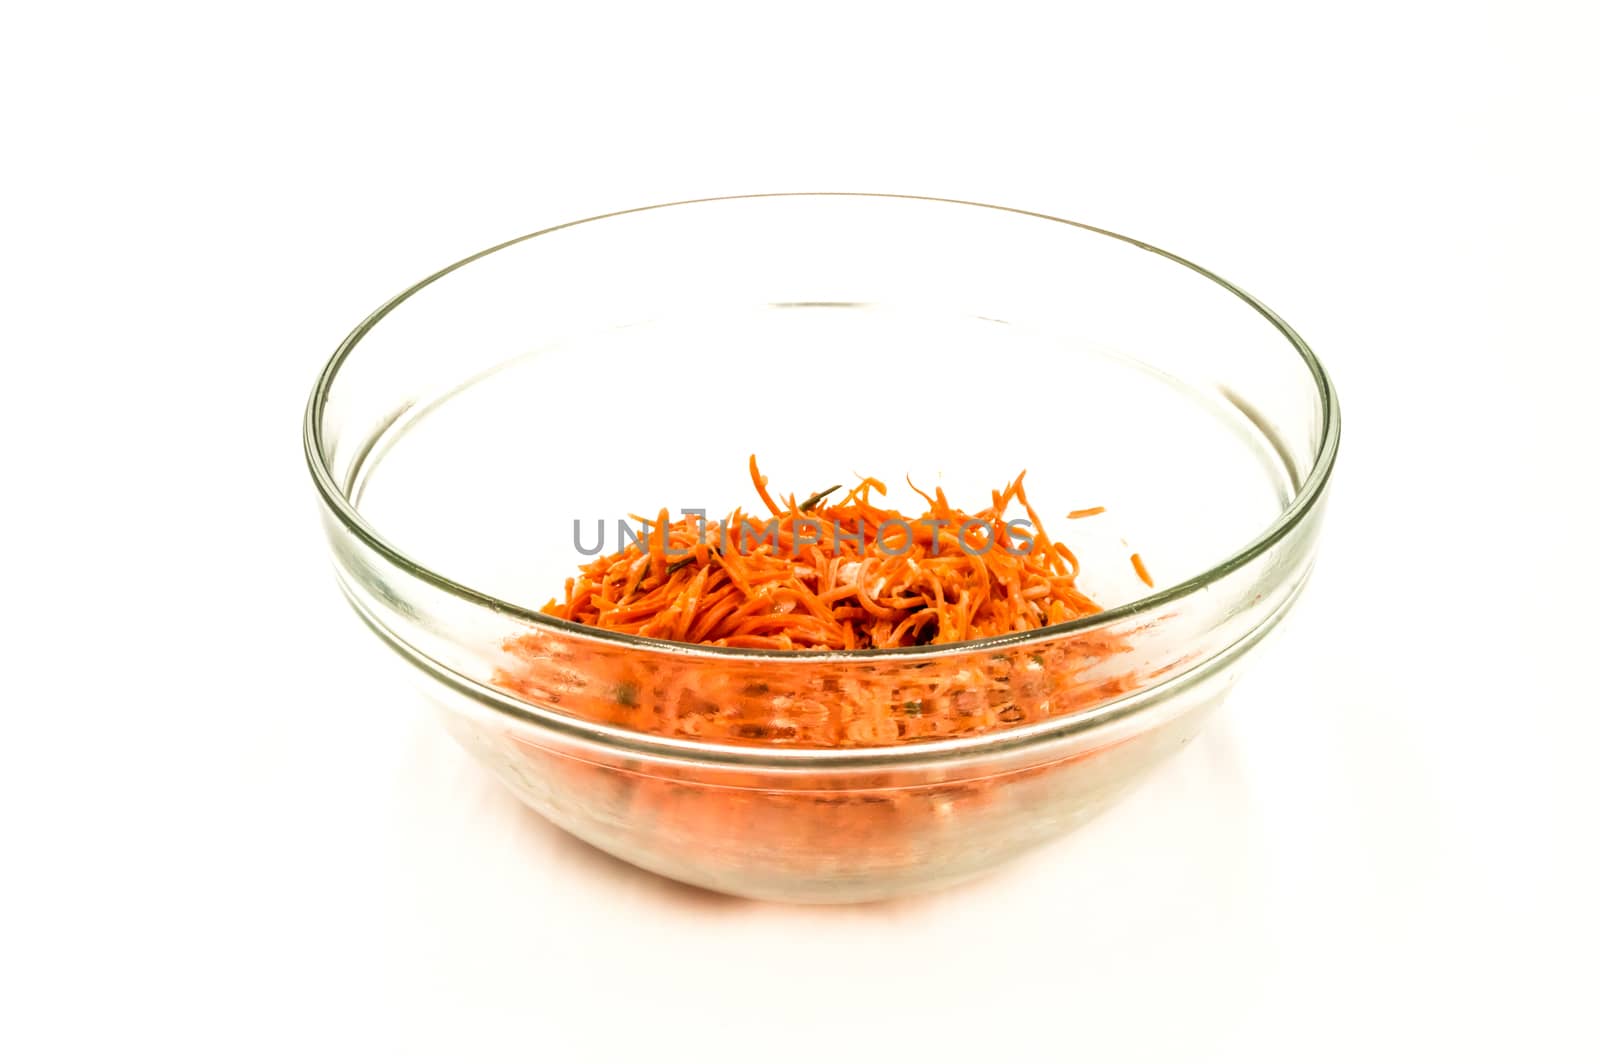 Grated carrot salad in a transparent  by Philou1000